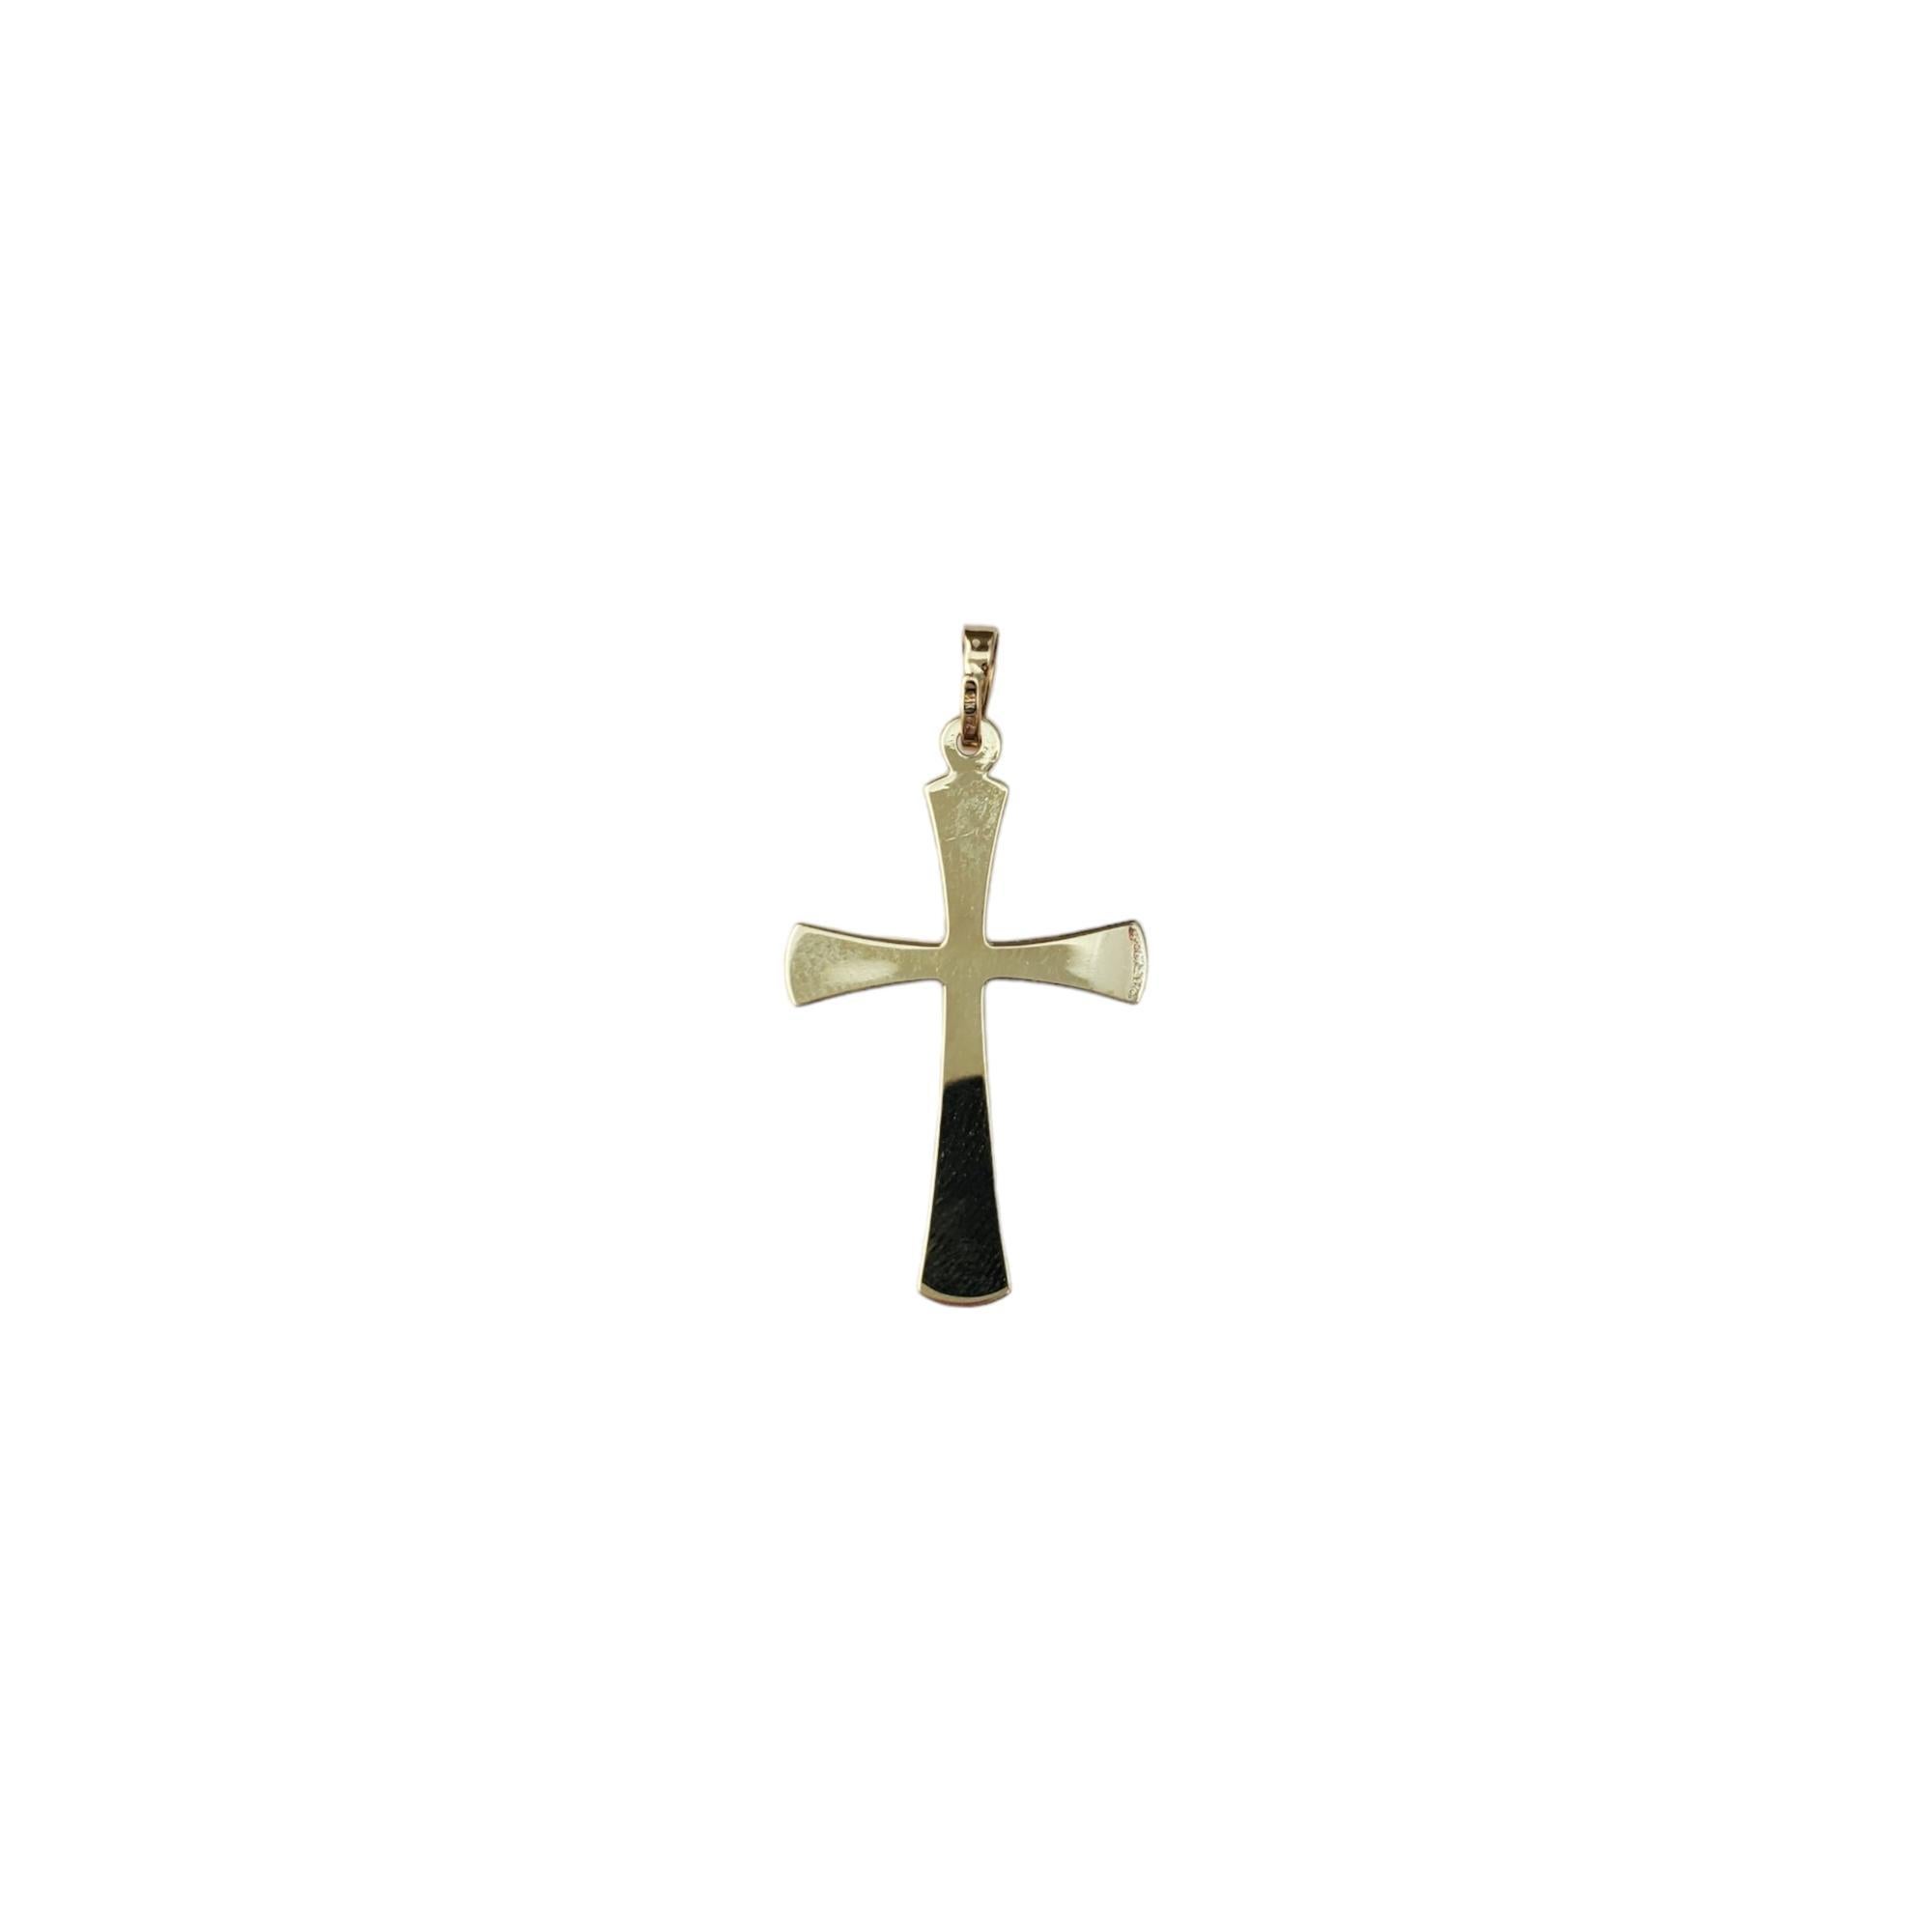 Vintage 14K Yellow Gold Cross Pendant - 

This simple cross pendant serves as a meaningful accessory. 

Size:  29mm X 18mm

Weight:  0.5dwt. /  0.78 gr.

Very good condition, professionally polished.

Stamped 14K KT

Will come packaged in a gift box